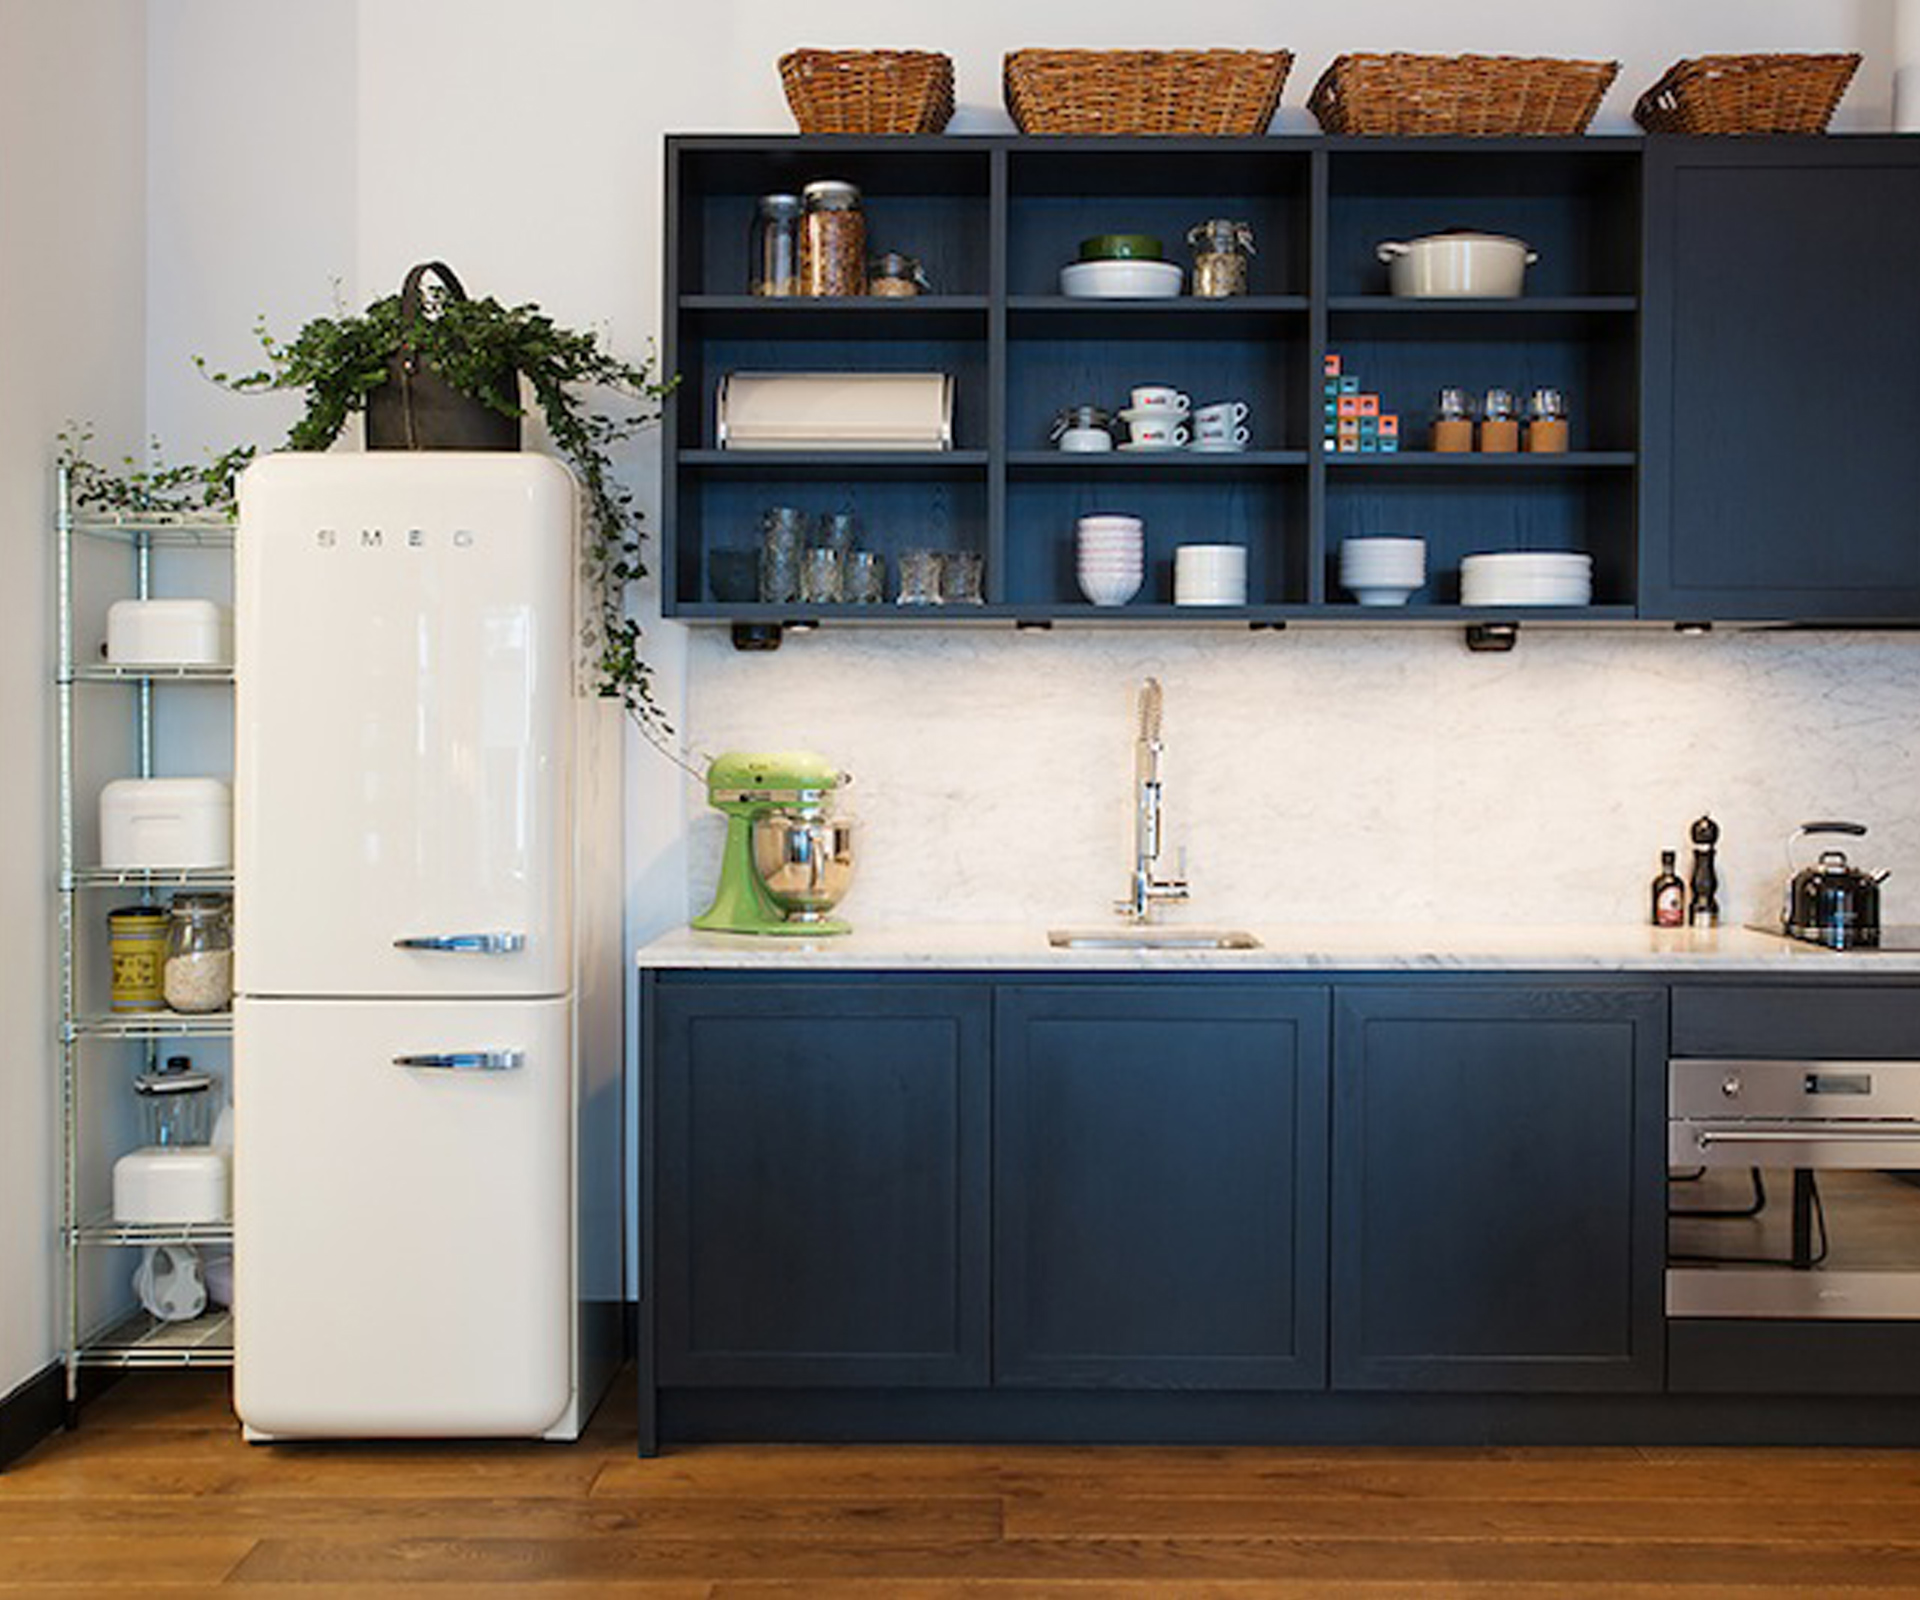 10 Times A Smeg Fridge Took A Kitchen From Ordinary To Extraordinary Your Home And Garden